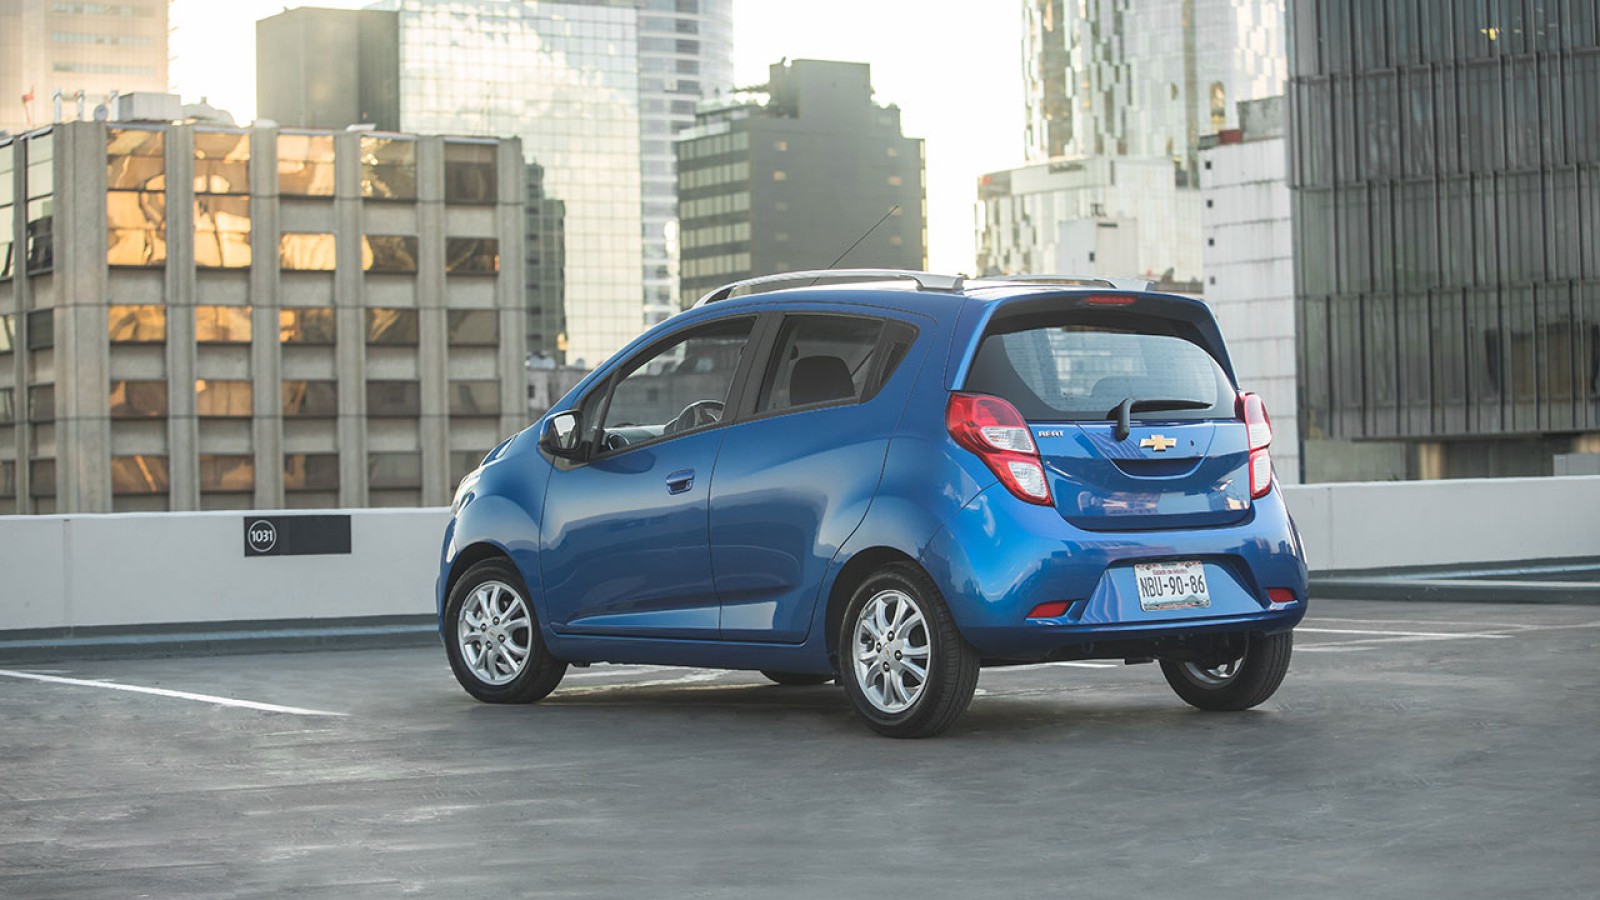 Gm Produces 100 000 Units Of Chevy Spark Gt In Colombia Gm Authority